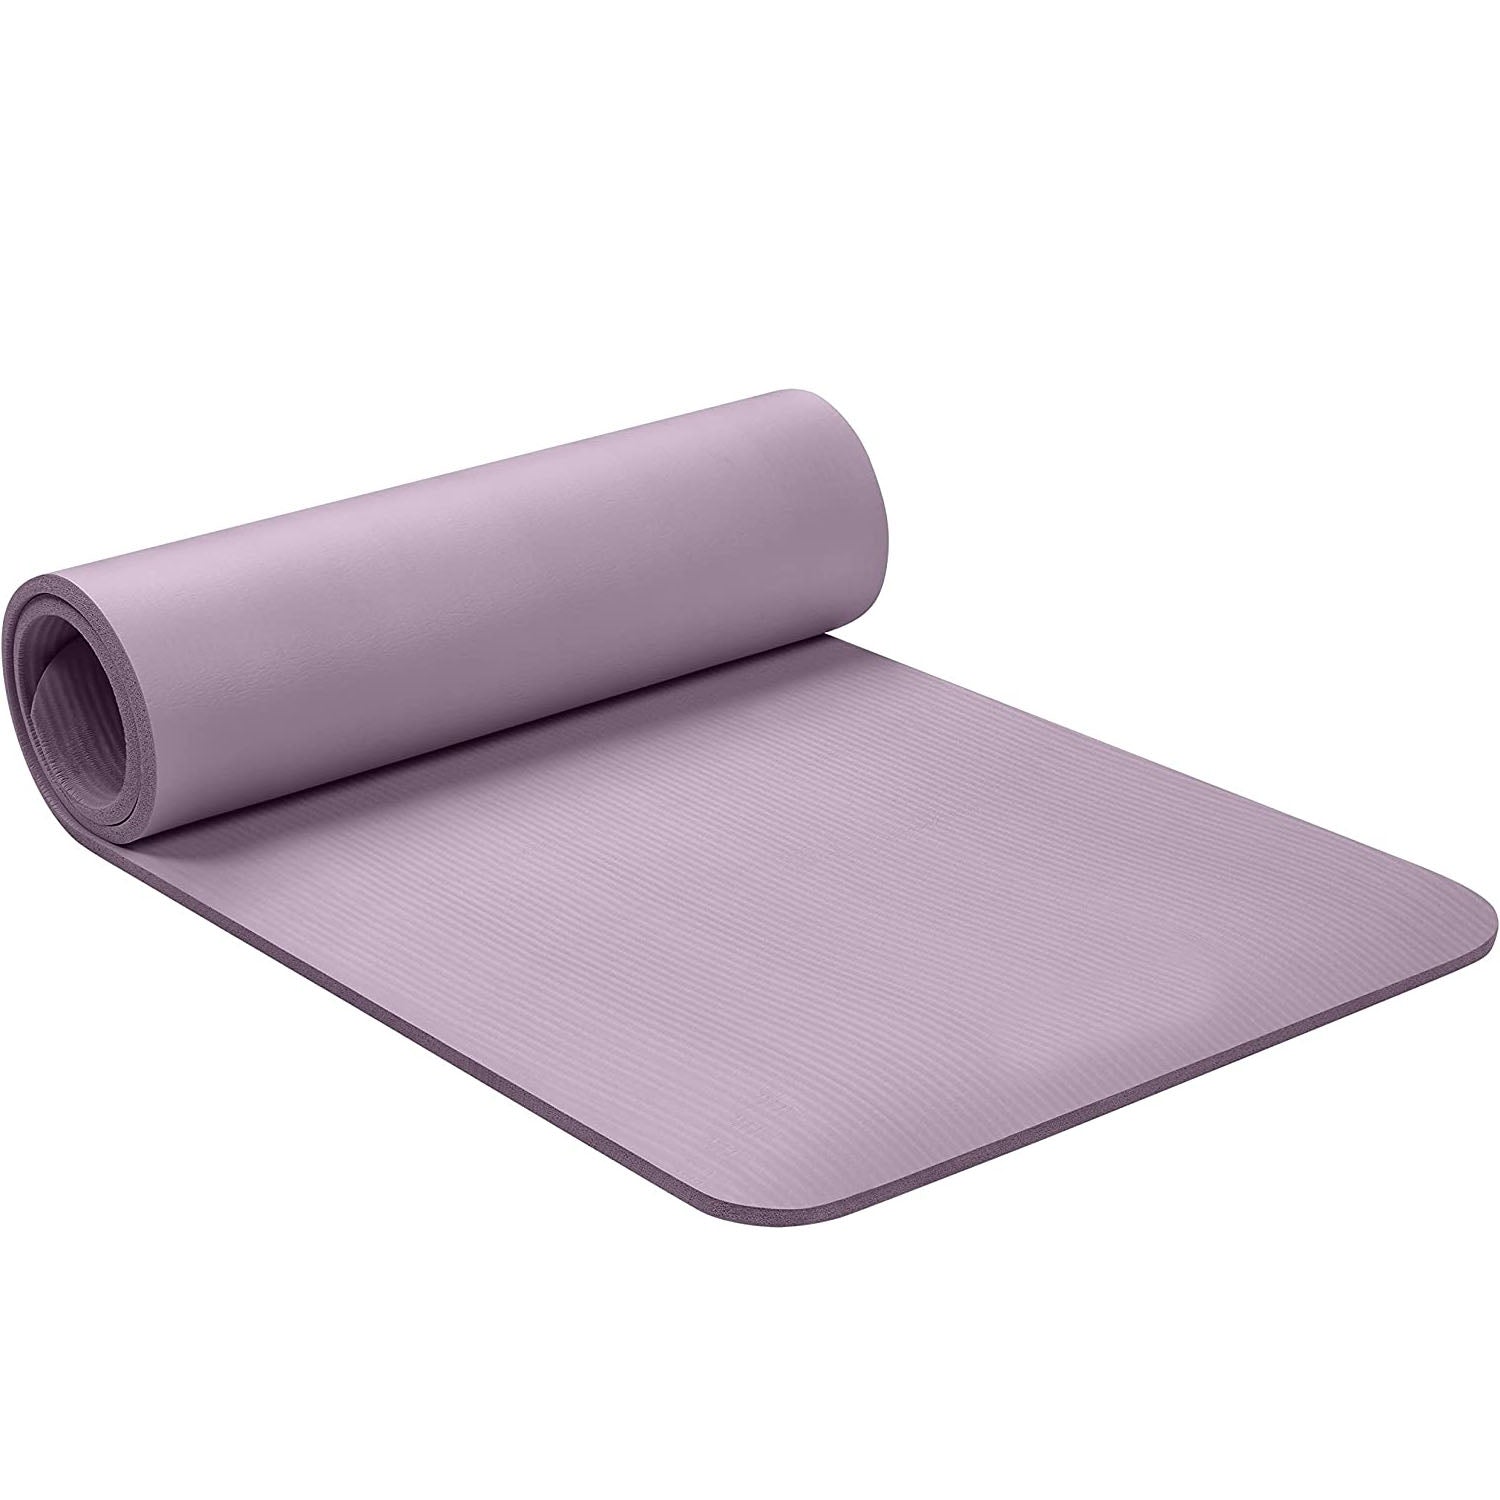 Stunner Fitness 10mm Yoga Mat, High-Density Non-Slip &Tear-Resistant,  Eco-Friendly TPE Material, Exercise & Workout Mat for Yoga, Pilates, and  Fitness (Voilet) : : Sports, Fitness & Outdoors